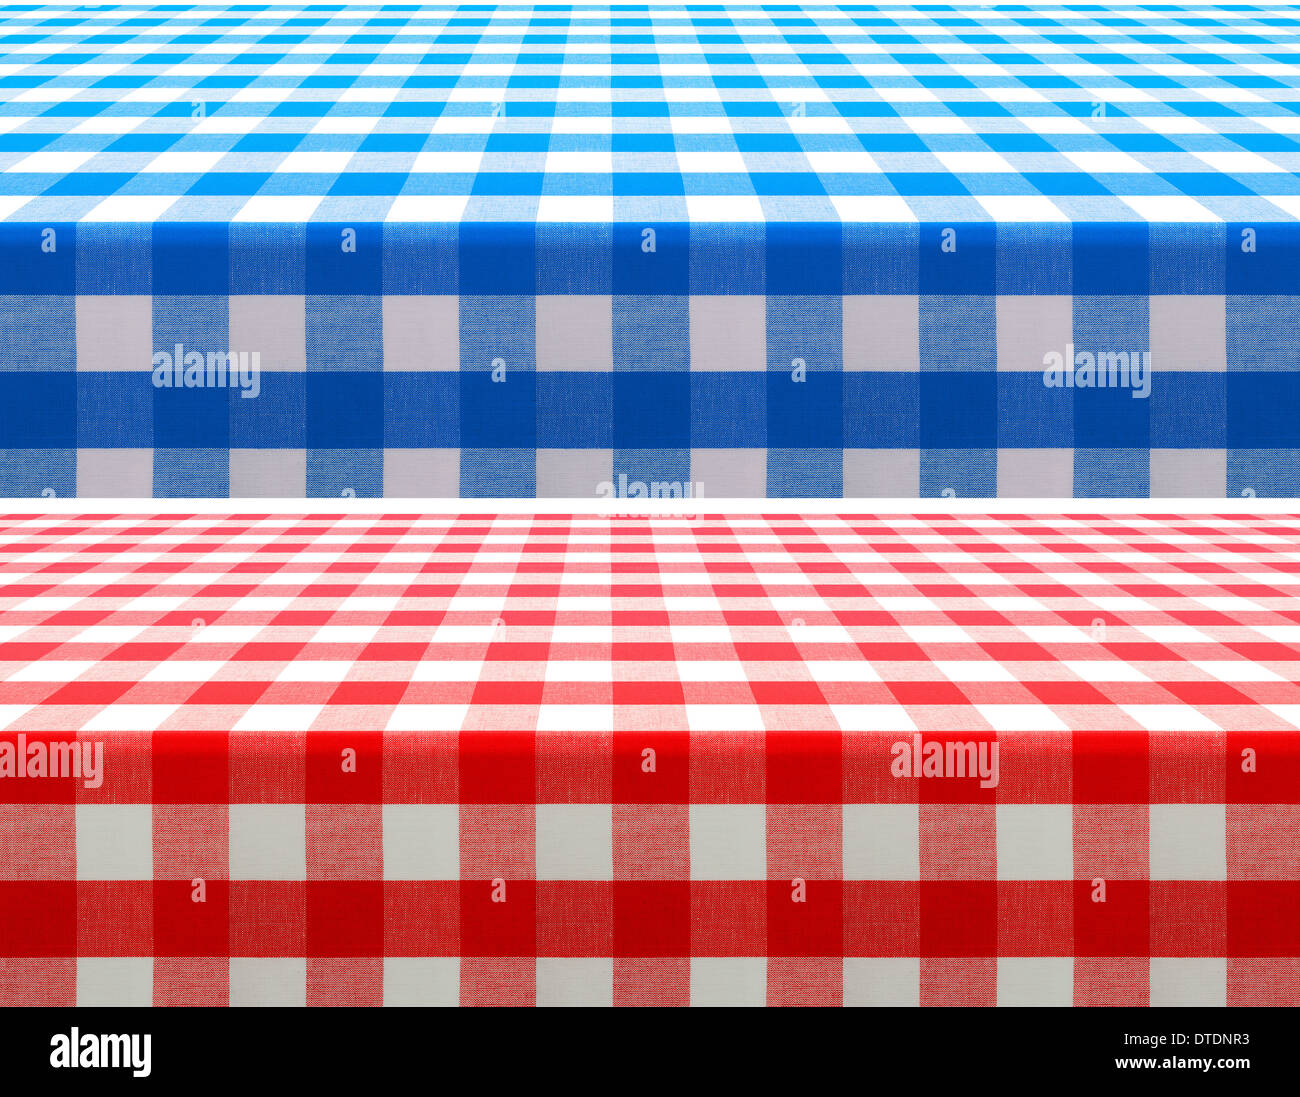 table surface perspective view covered by red and blue checkered tablecloth Stock Photo